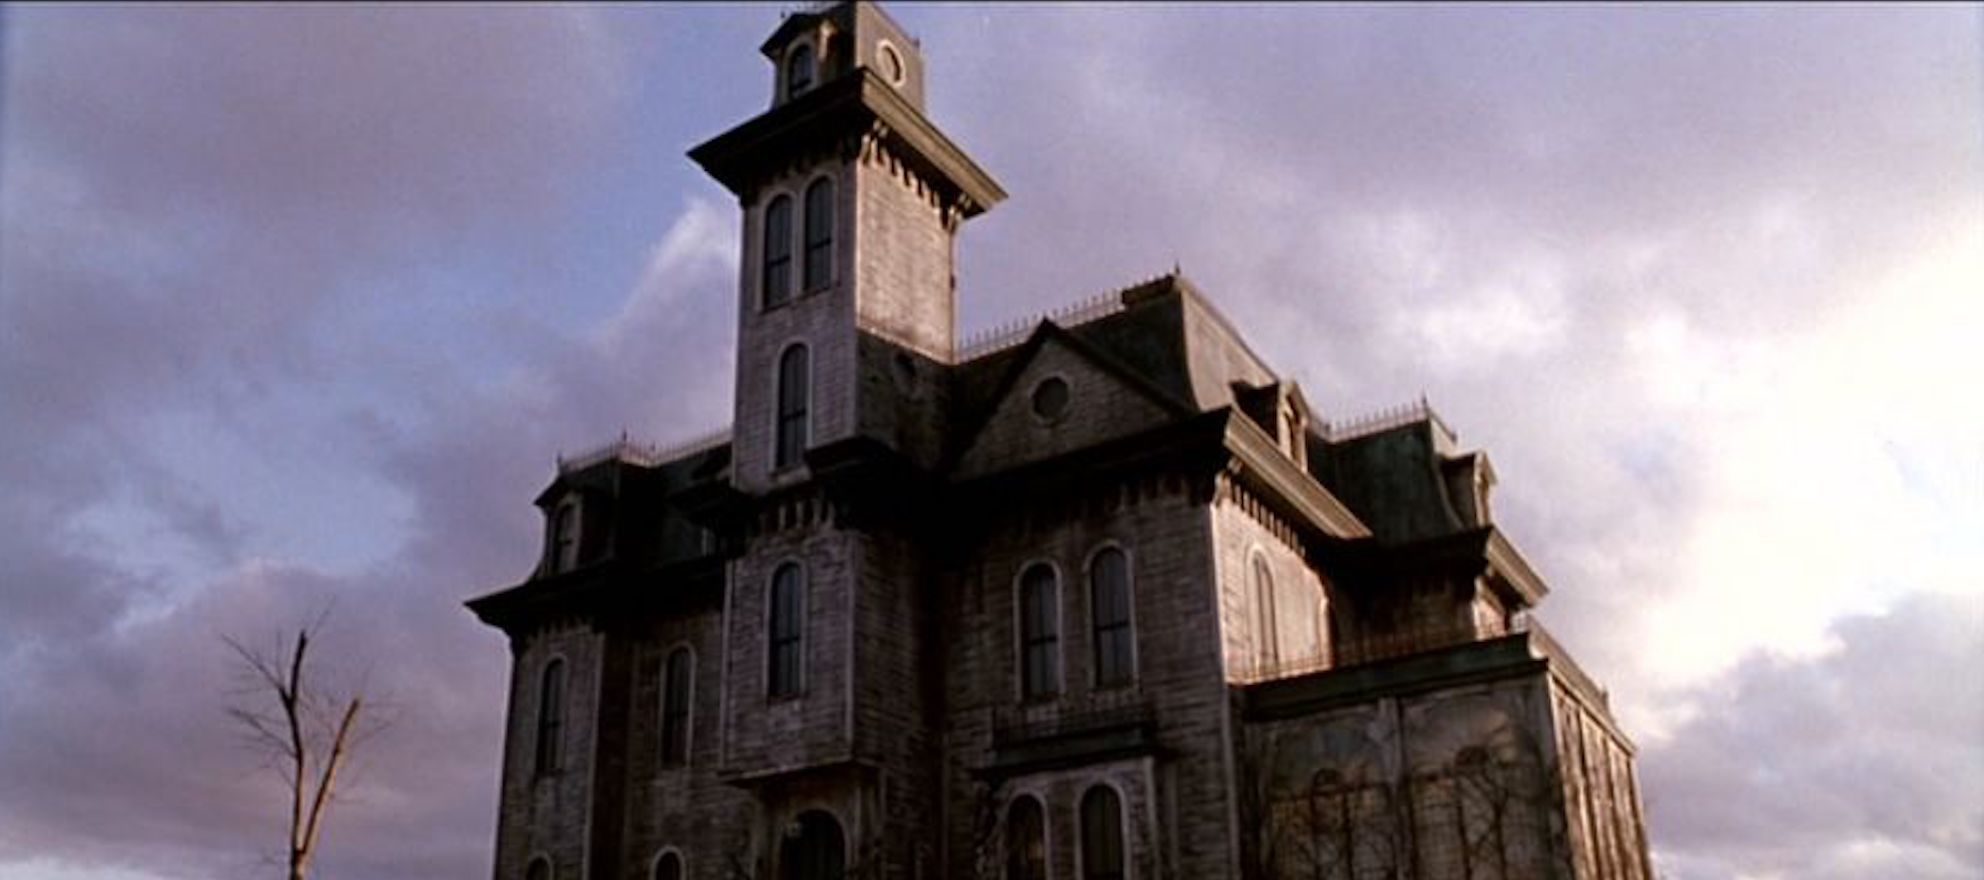 Addams Family Mansion from the 1993 movie